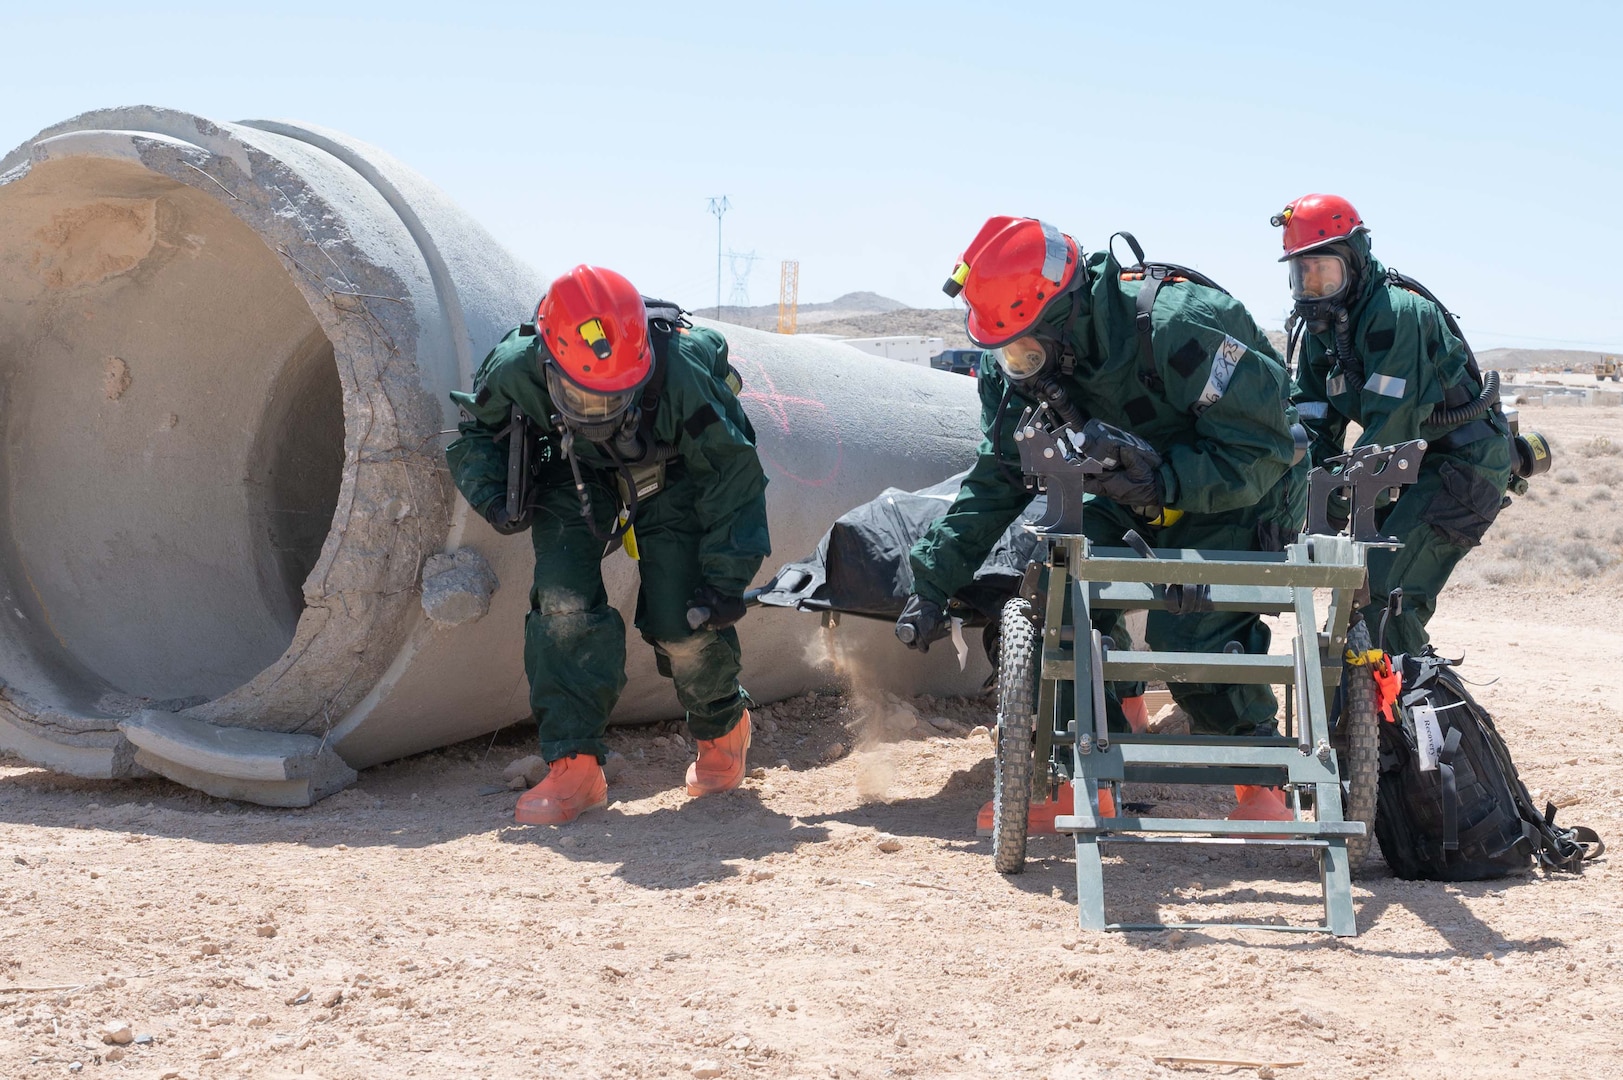 FSS specialists who have volunteered for the FSRT mission, transport simulated human remains during an in-person combined training event with other Air and Army National Guard units in Las Vegas in April 2022.